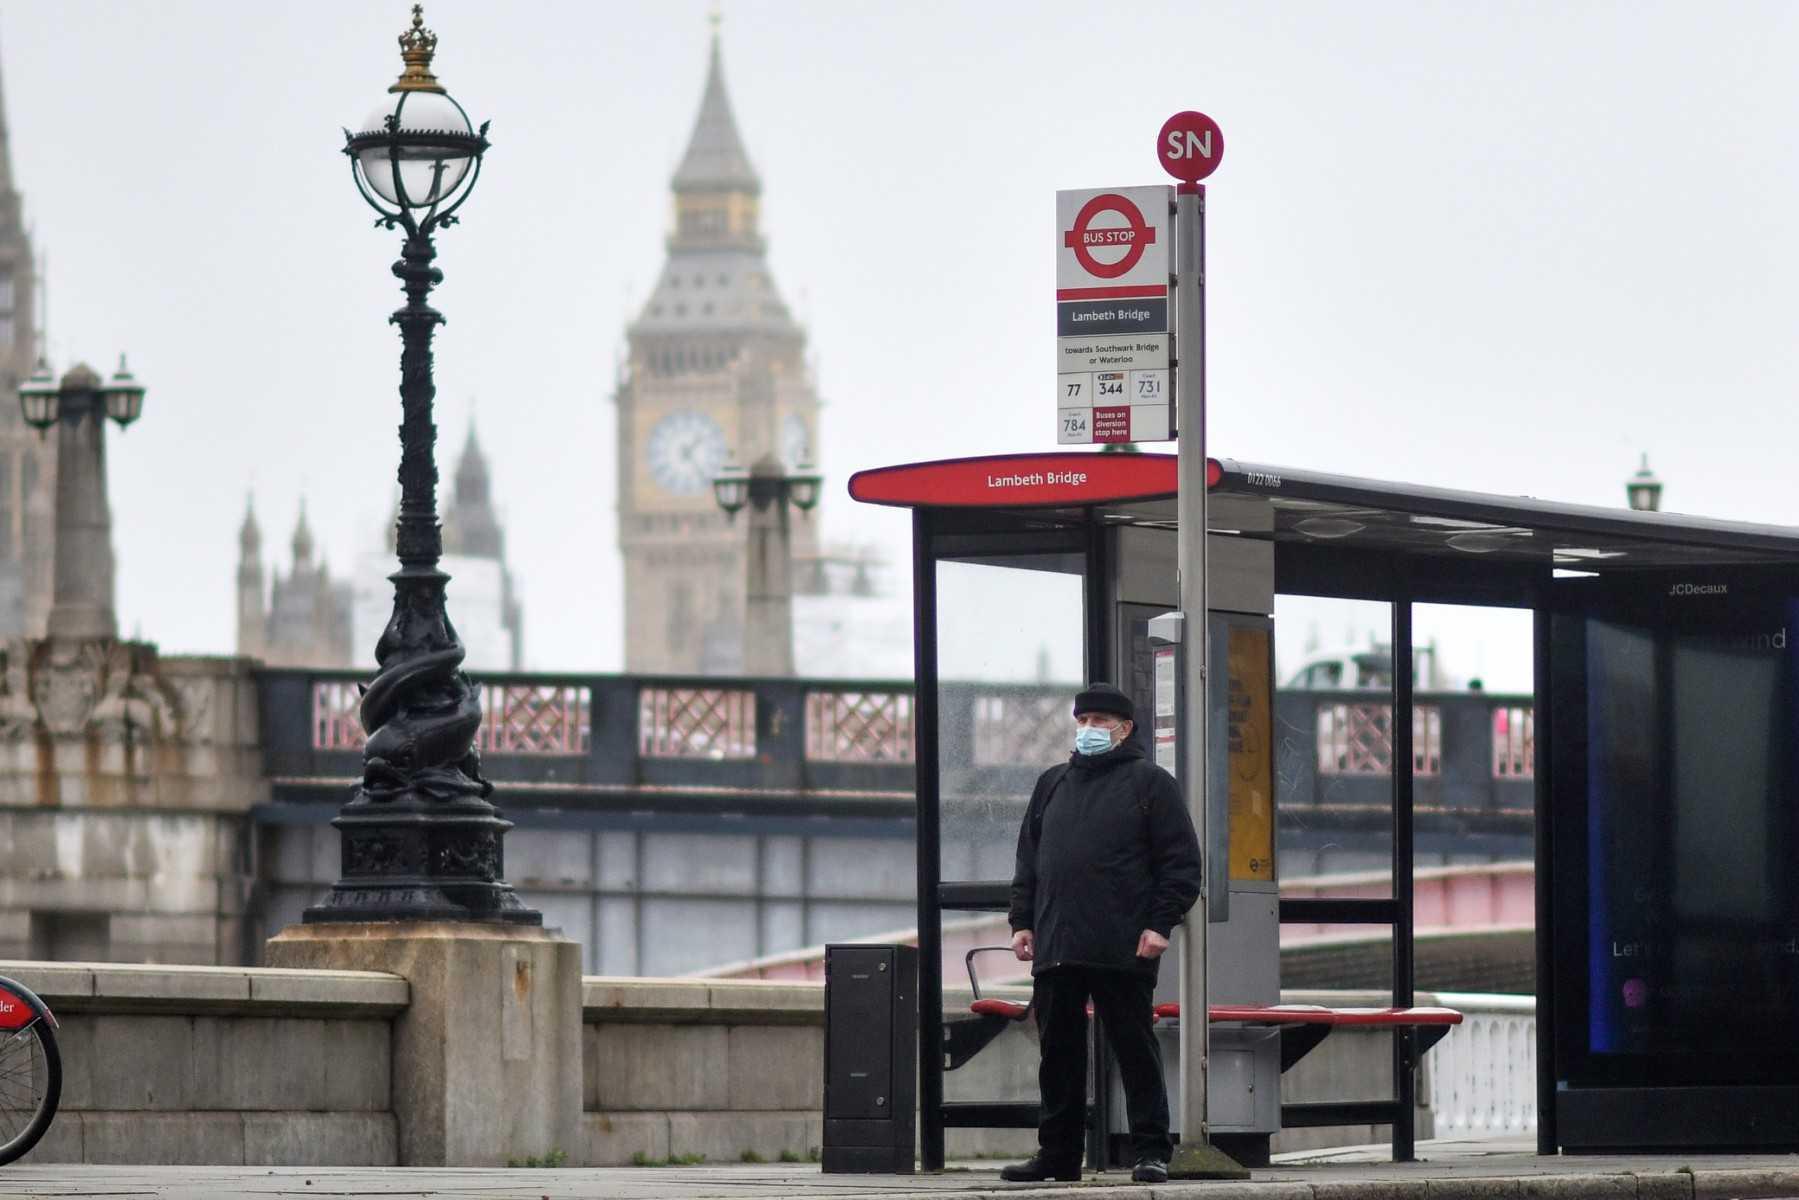 A commuter waits at a bus stop near the Elizabeth Tower, commonly known as Big Ben, at the Palace of Westminster in London on Feb 16.  Photo: AFP 